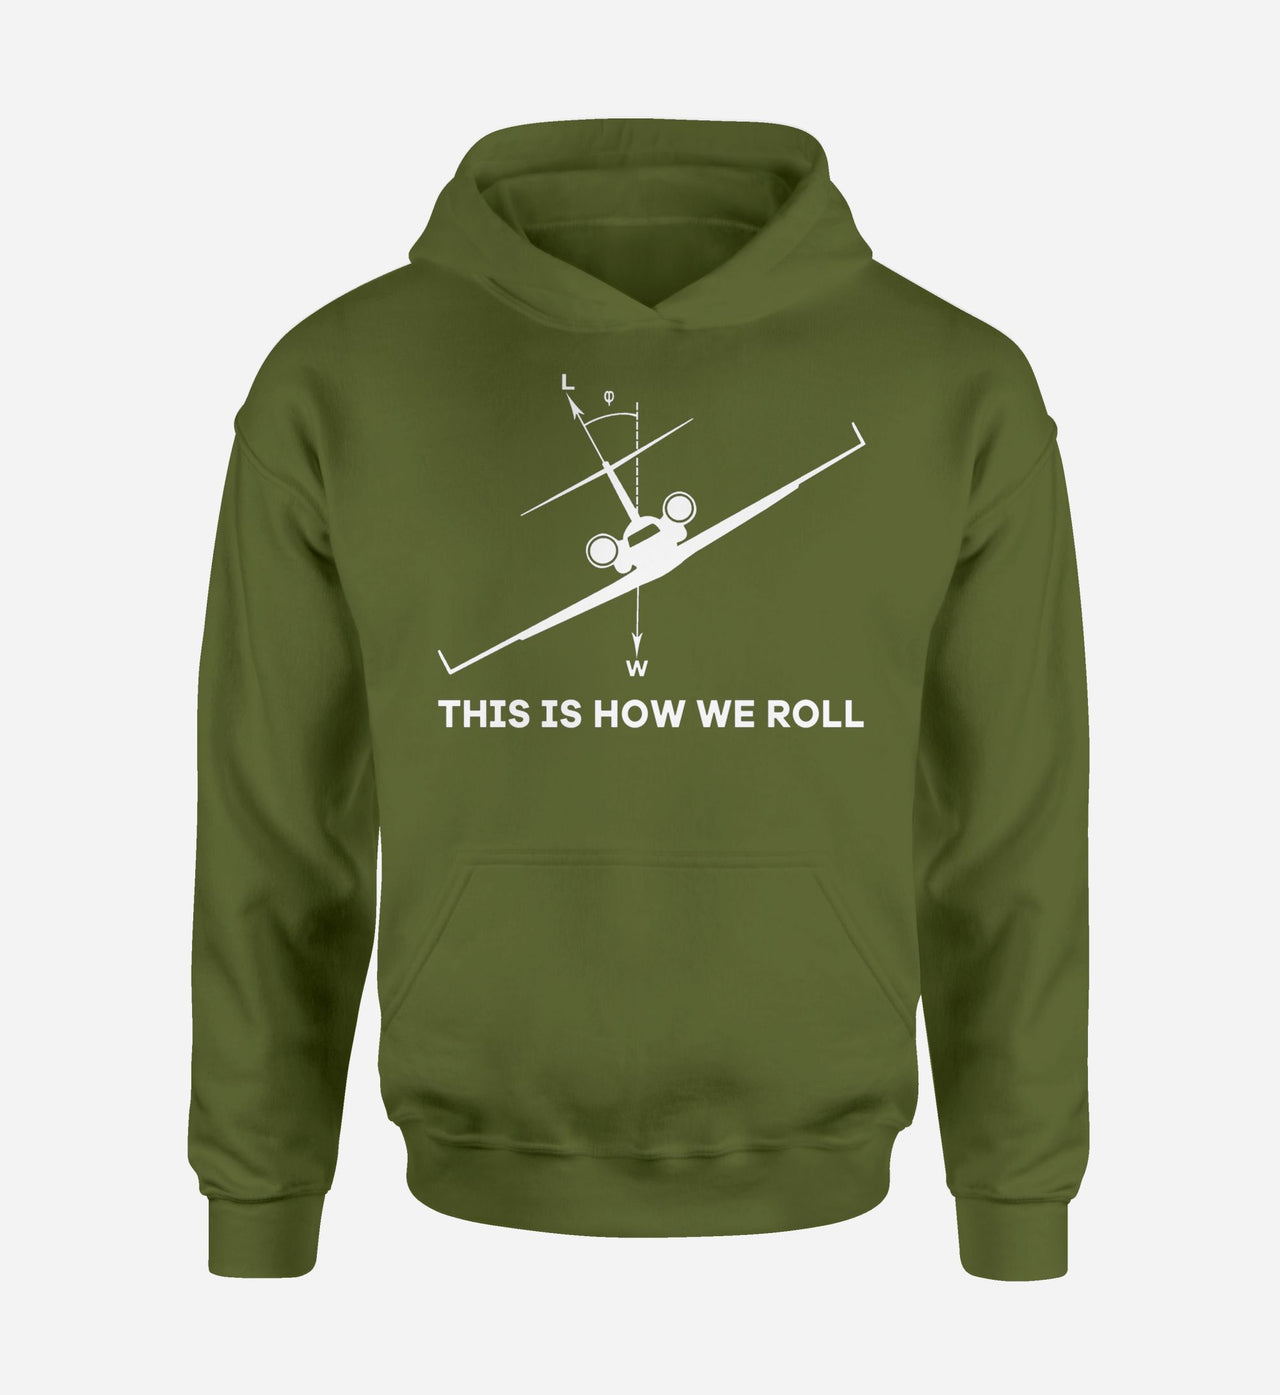 This is How We Roll Designed Hoodies